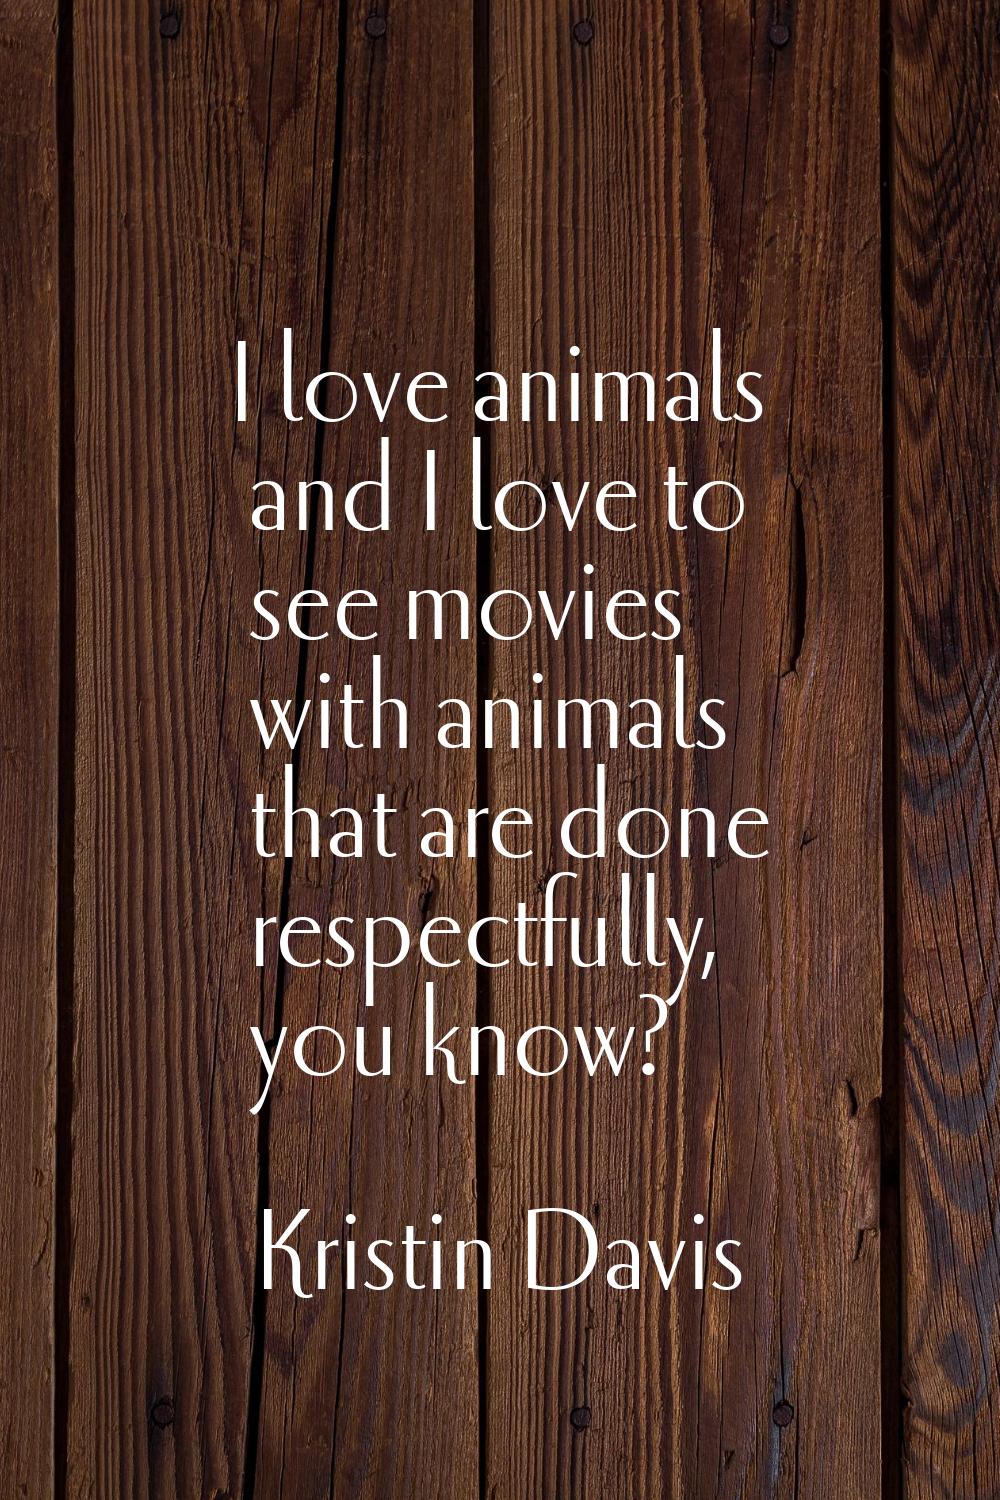 I love animals and I love to see movies with animals that are done respectfully, you know?